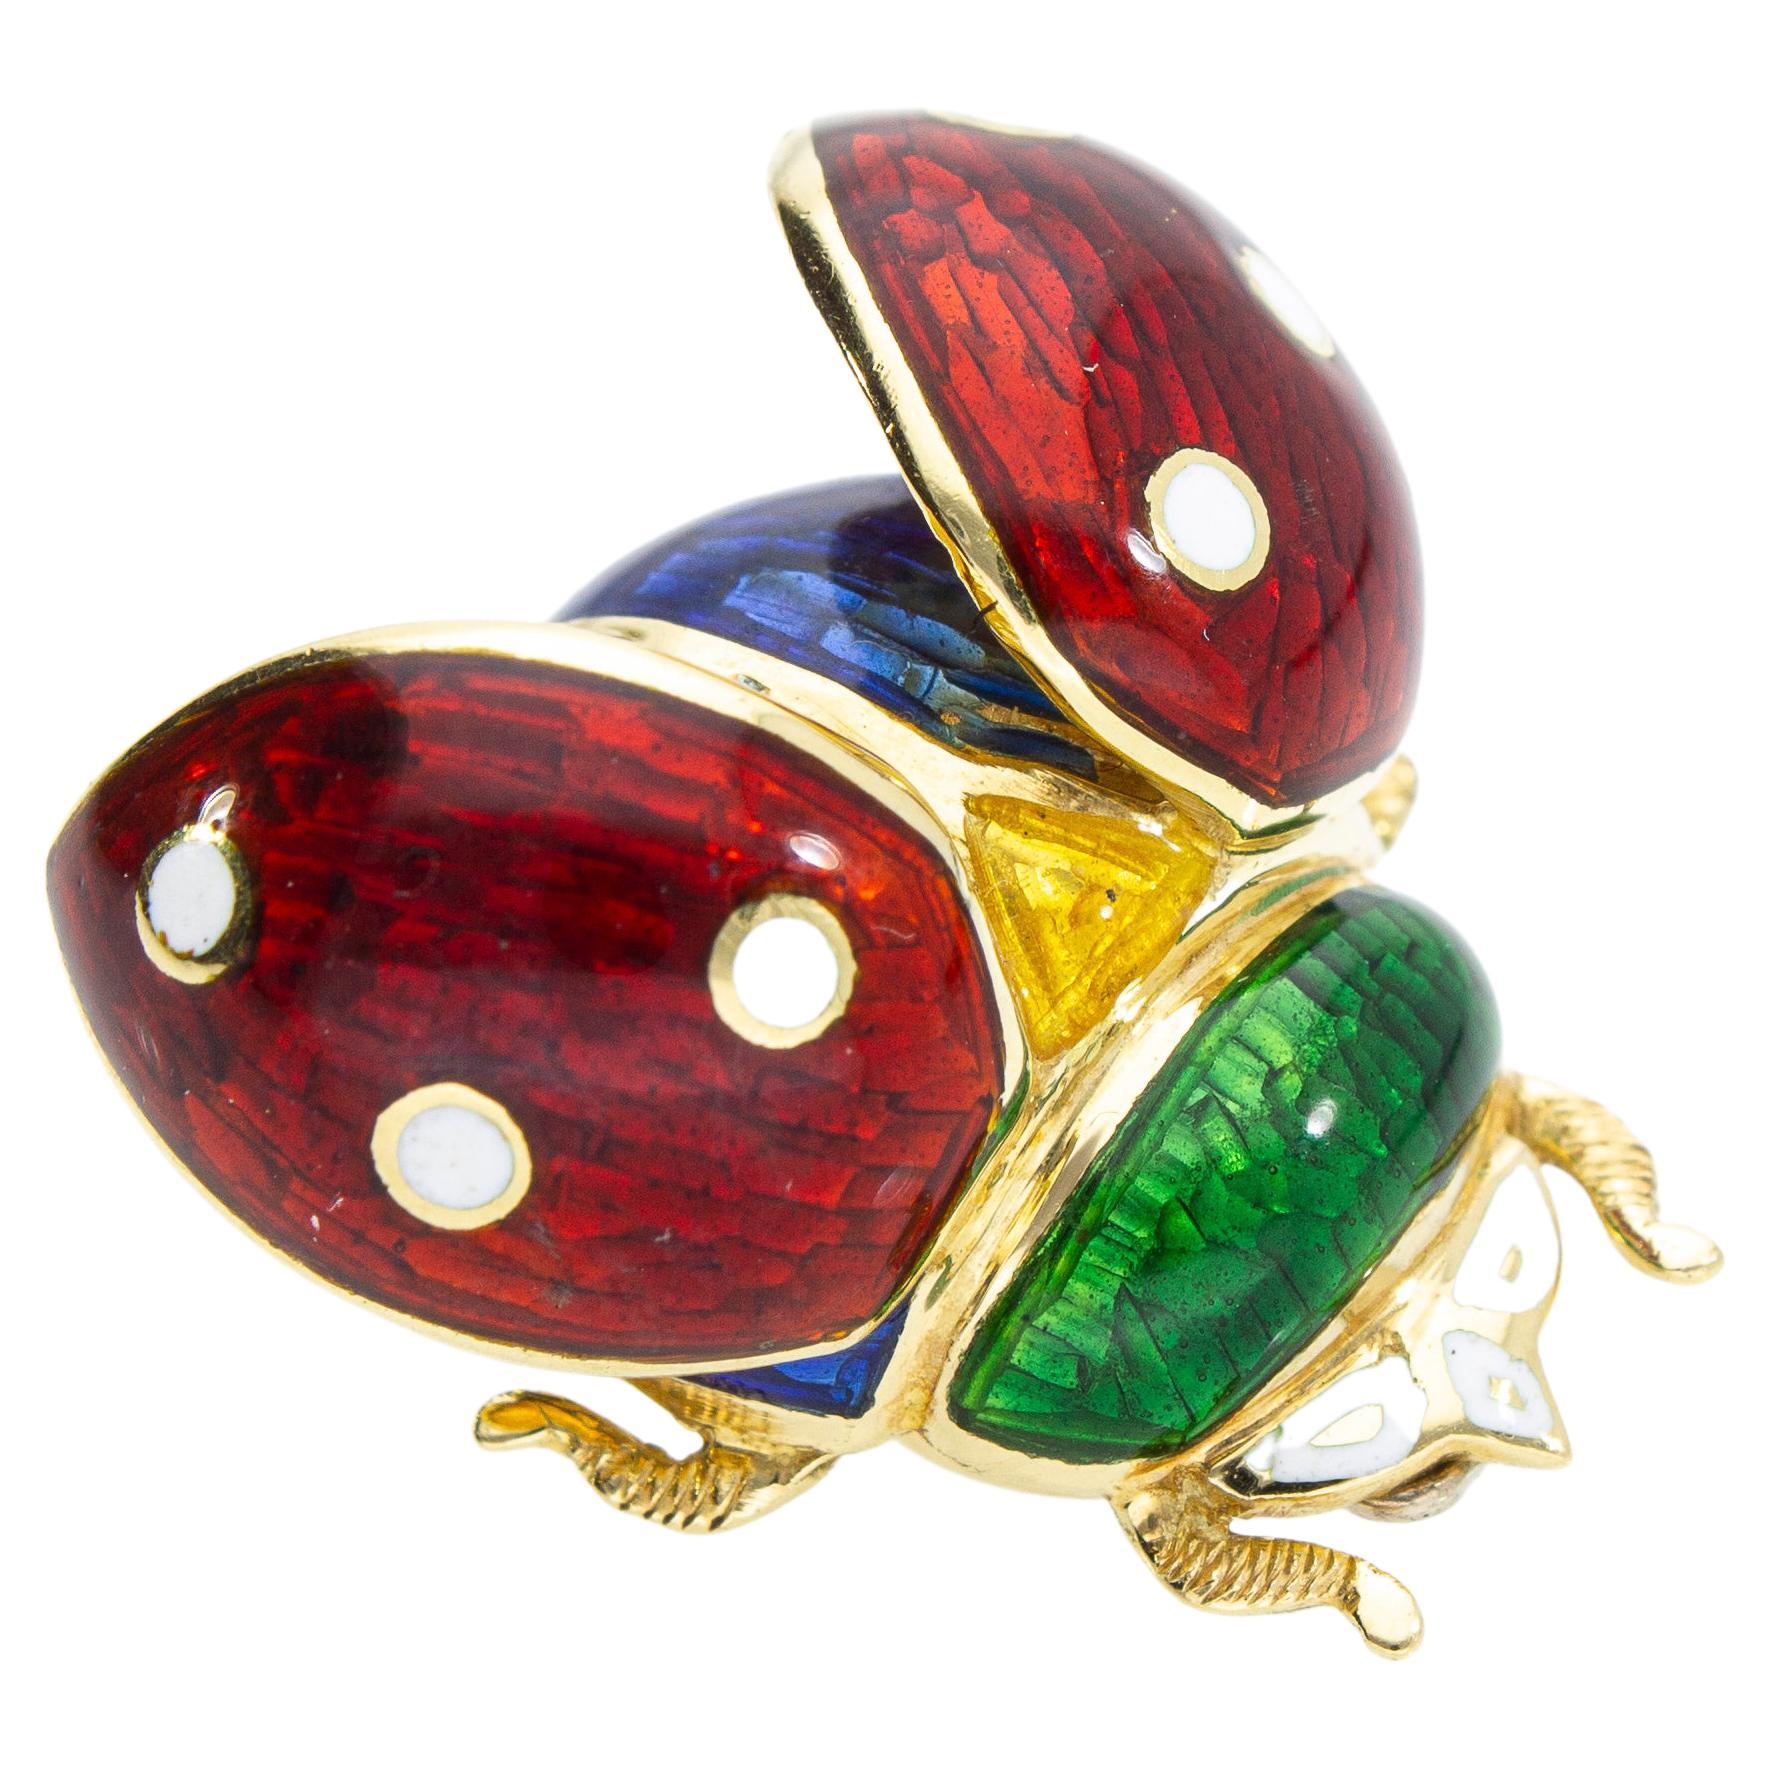 Ladybug-Shaped Pendant and Brooch with Enamel of Various Colors